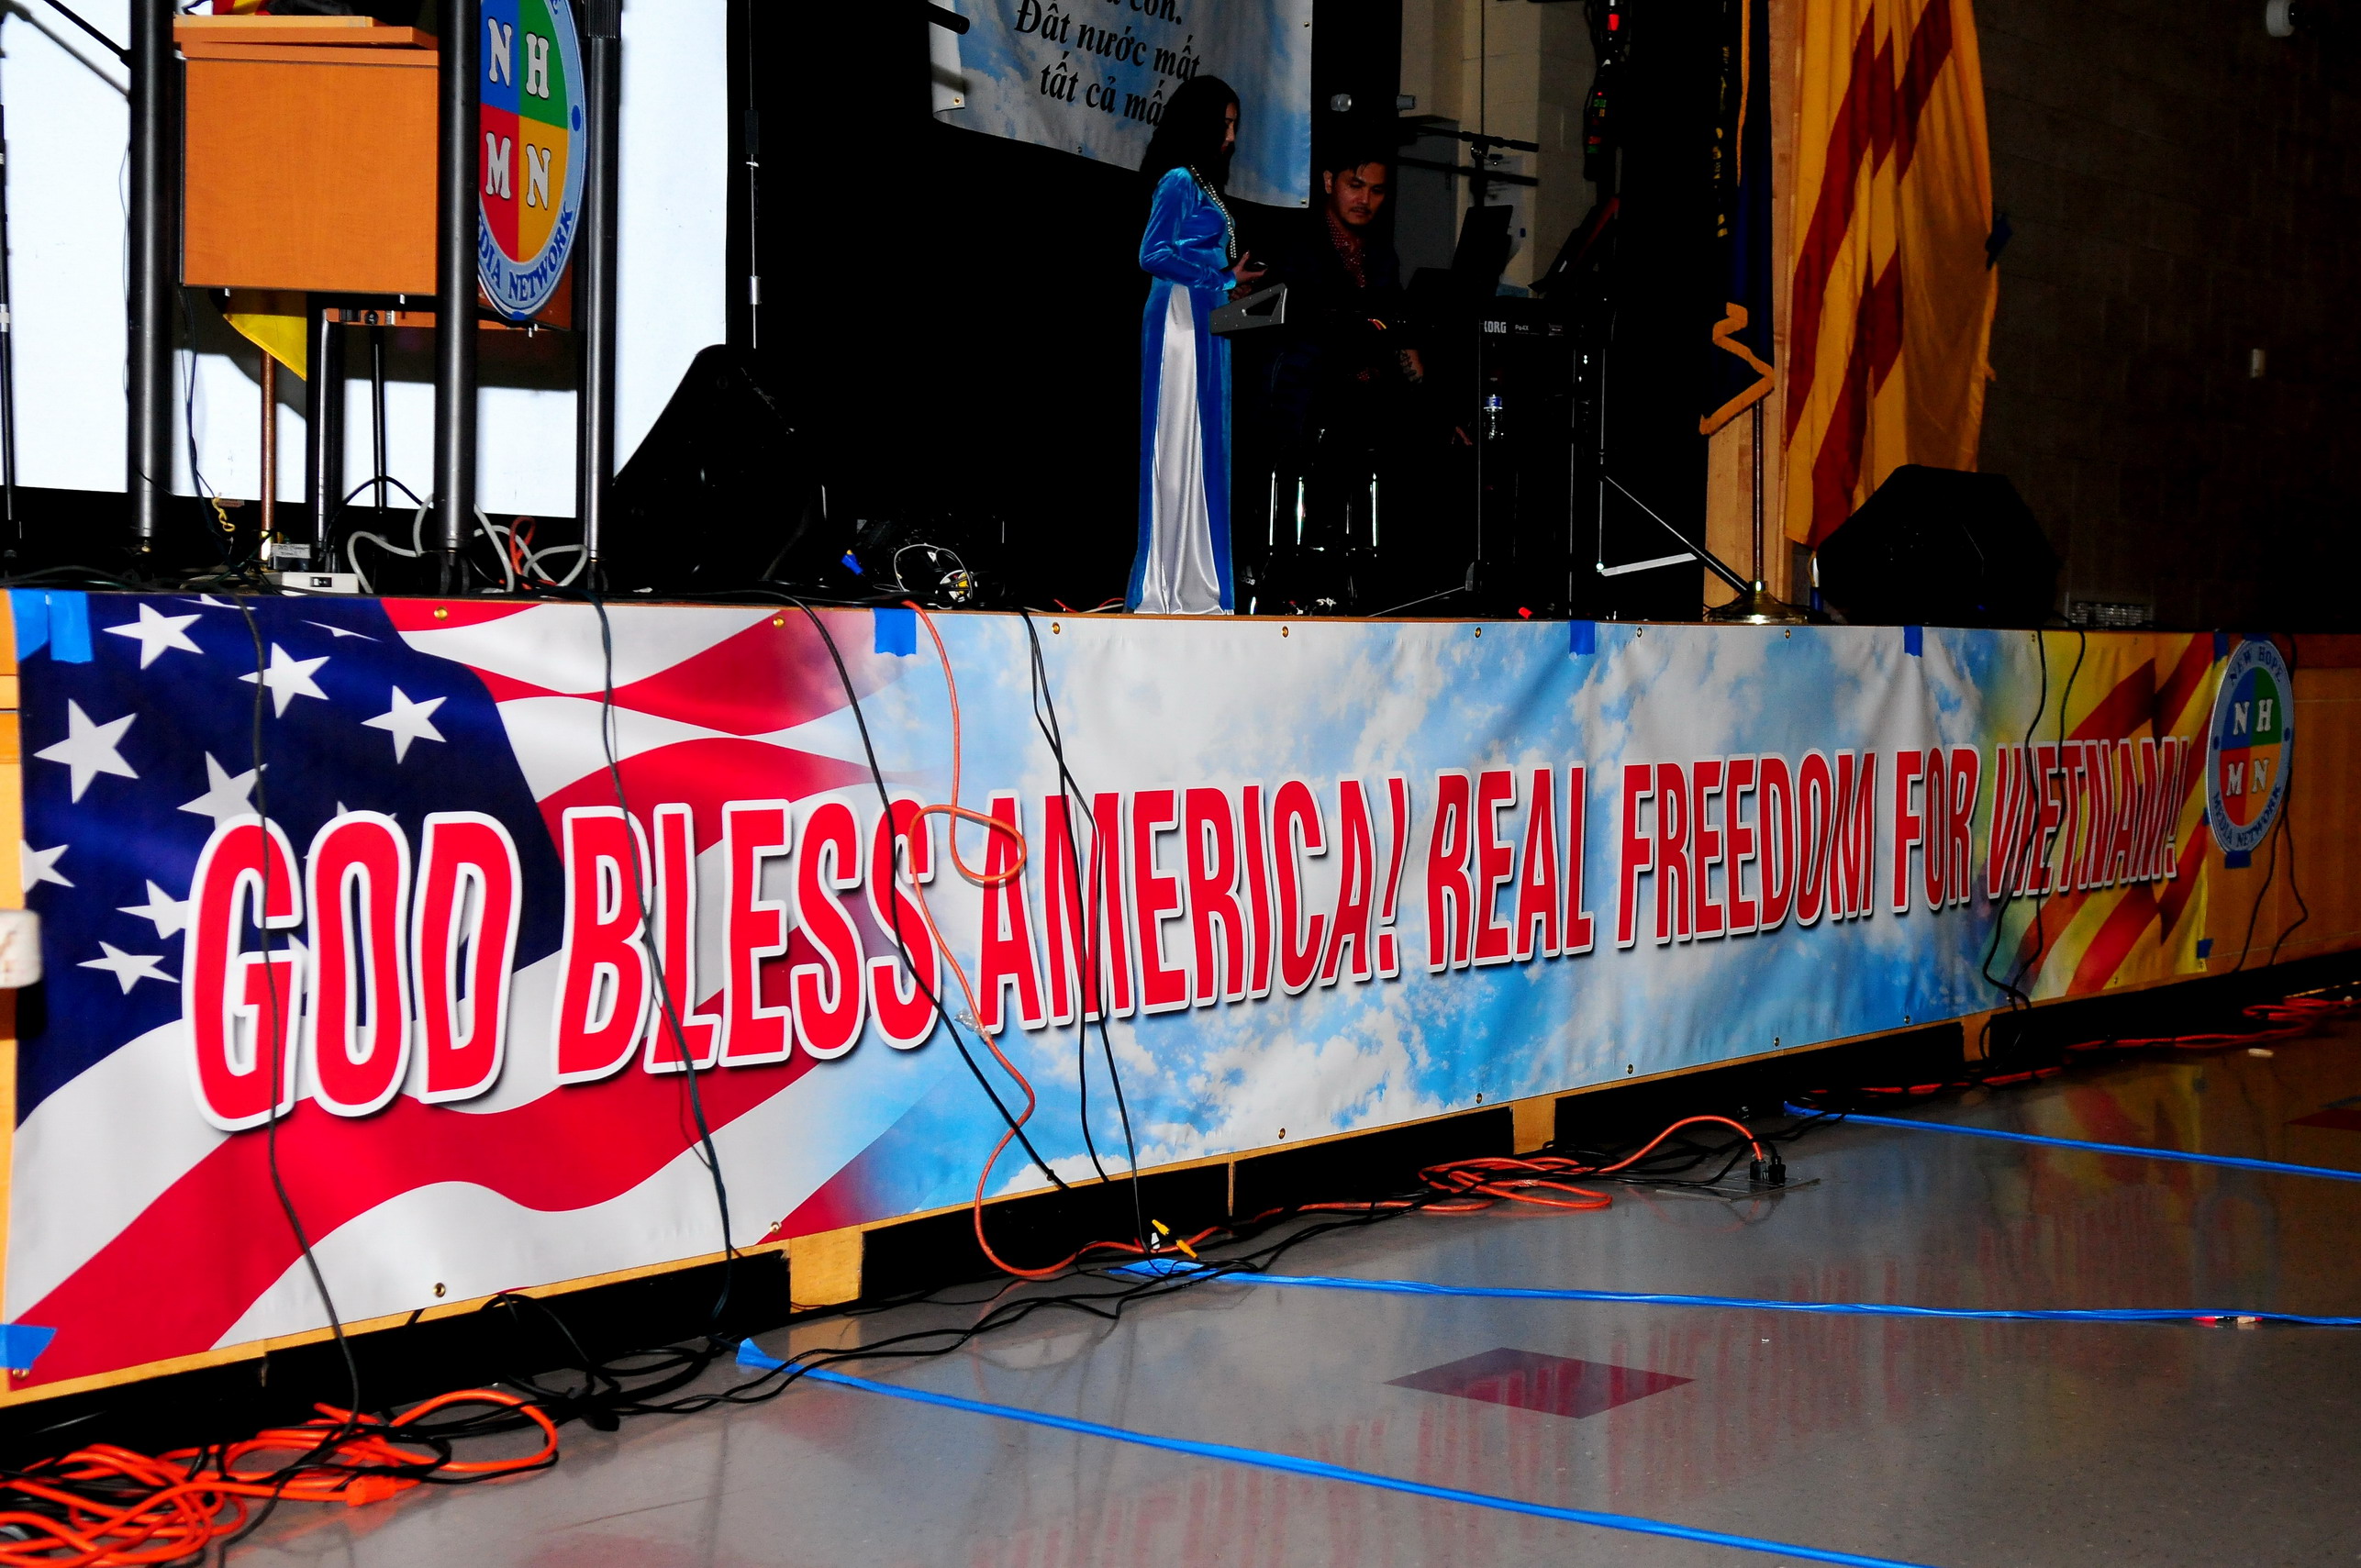 00001A-God Bless America- Real Freedom for Vietnam